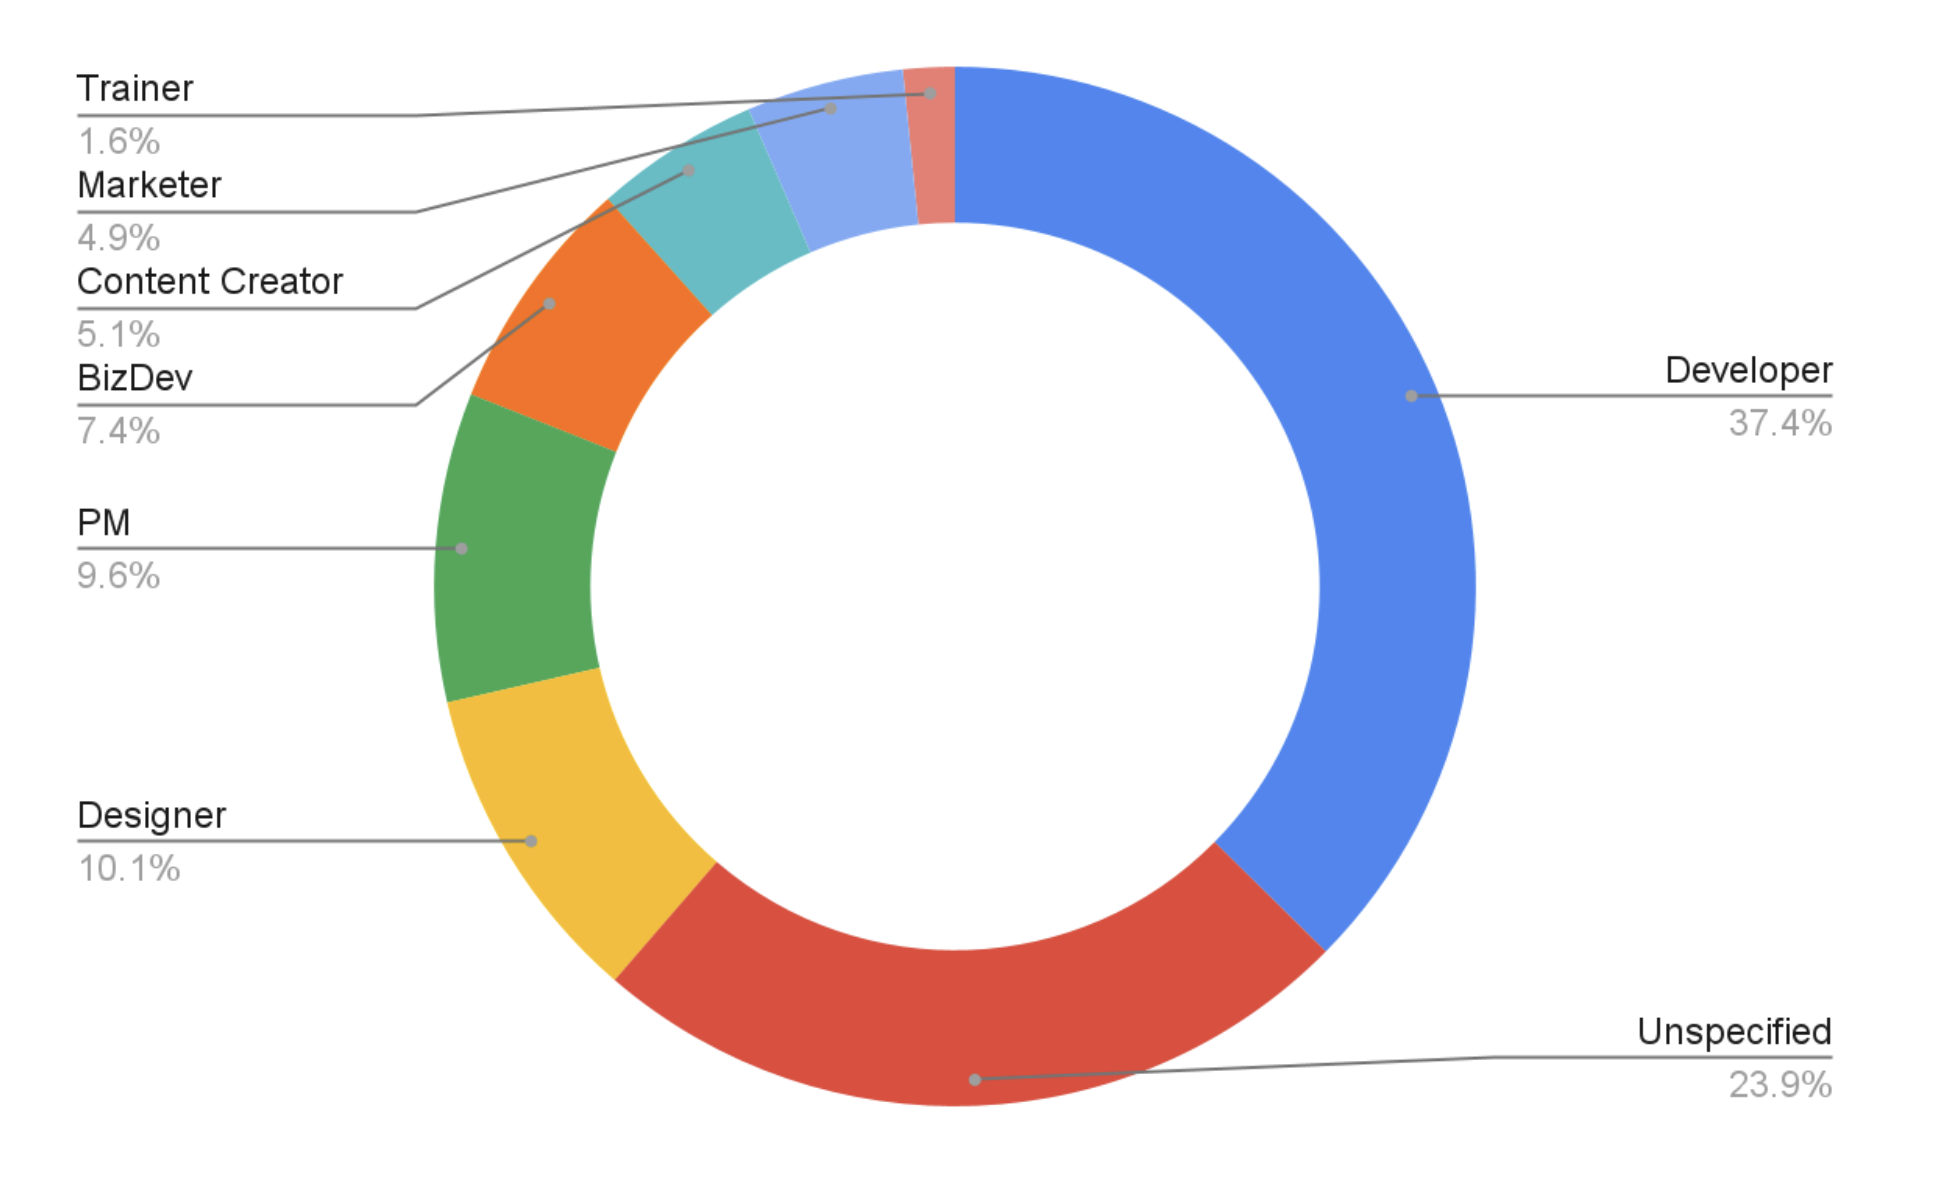 Pie chart of audience roles. 37.4% are developers, 23.9% unspecified, 10.1% are designers, 9.6% are project managers, 7.4% are in business development, 5% are content creators, 5% are marketers, and 1.6% are trainers.